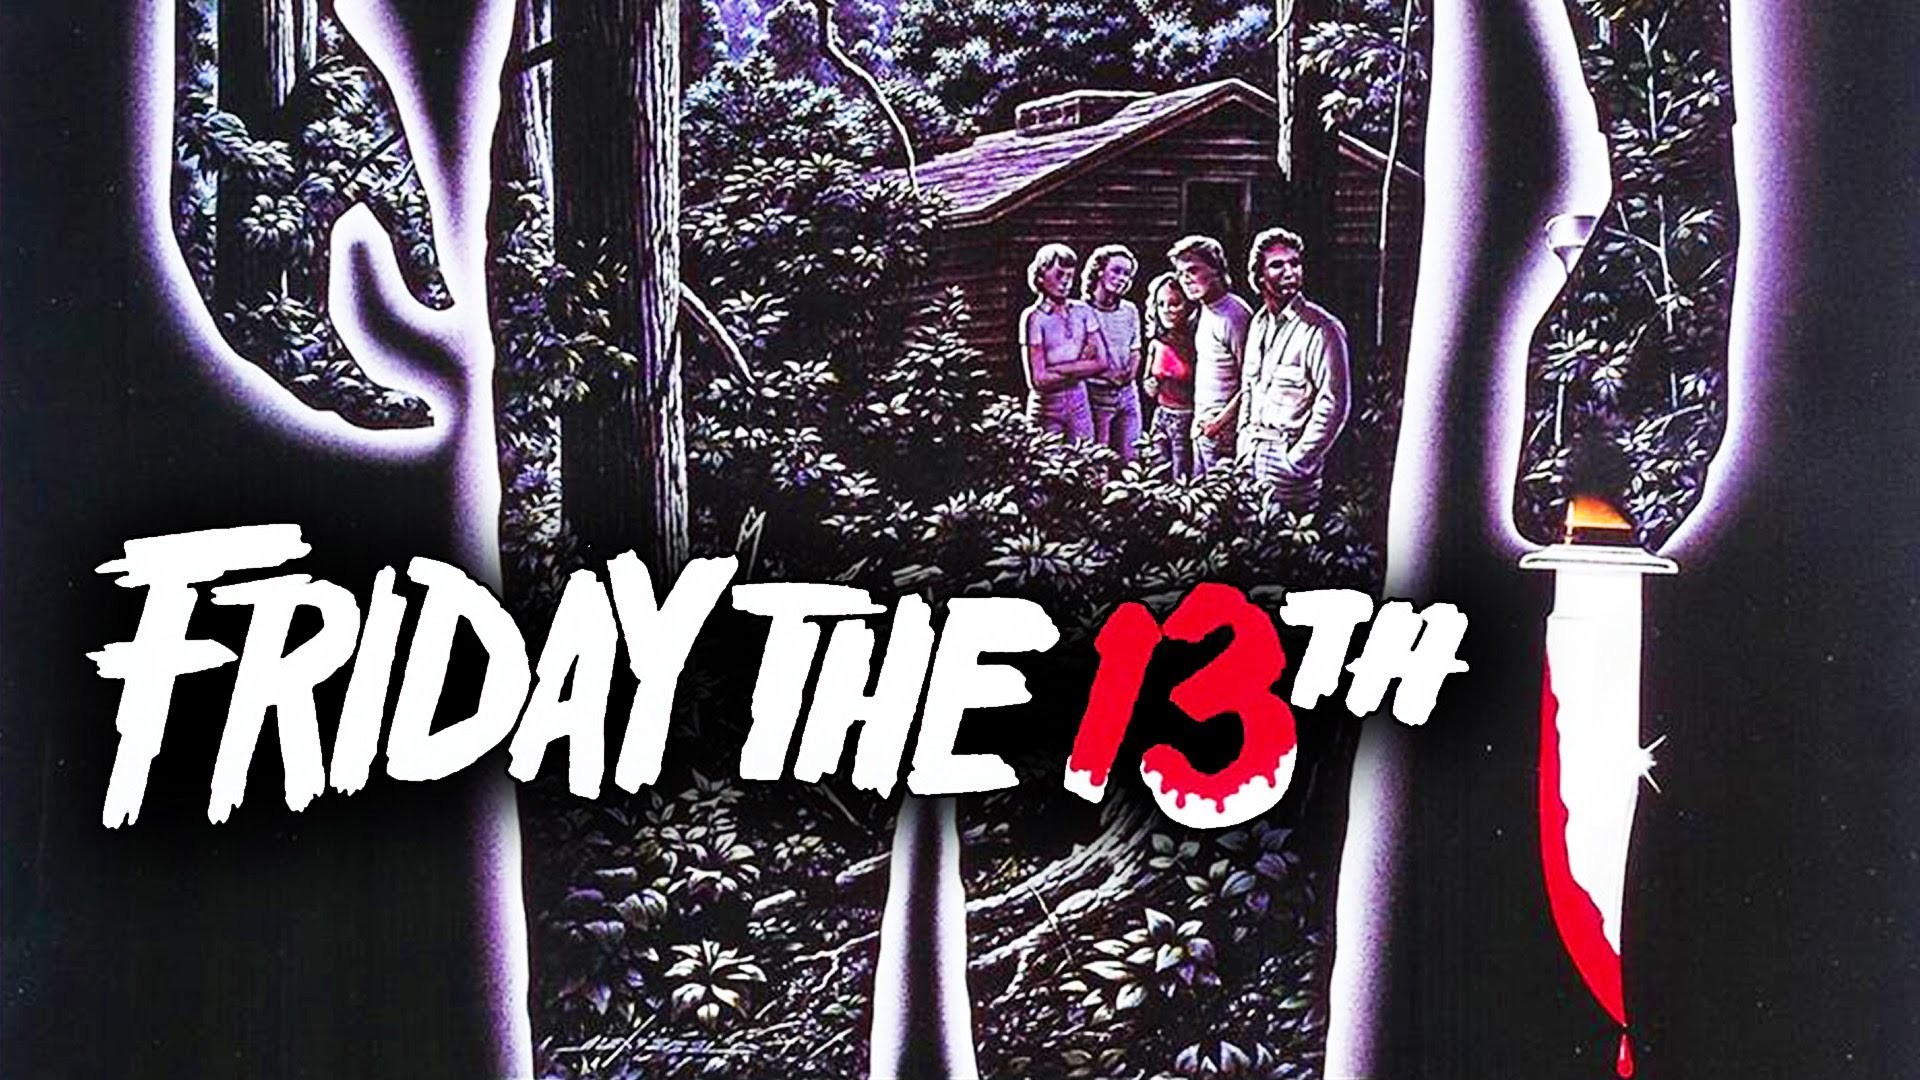 Friday the 13th Movie Run Returns To Its Blairstown Roots This Friday